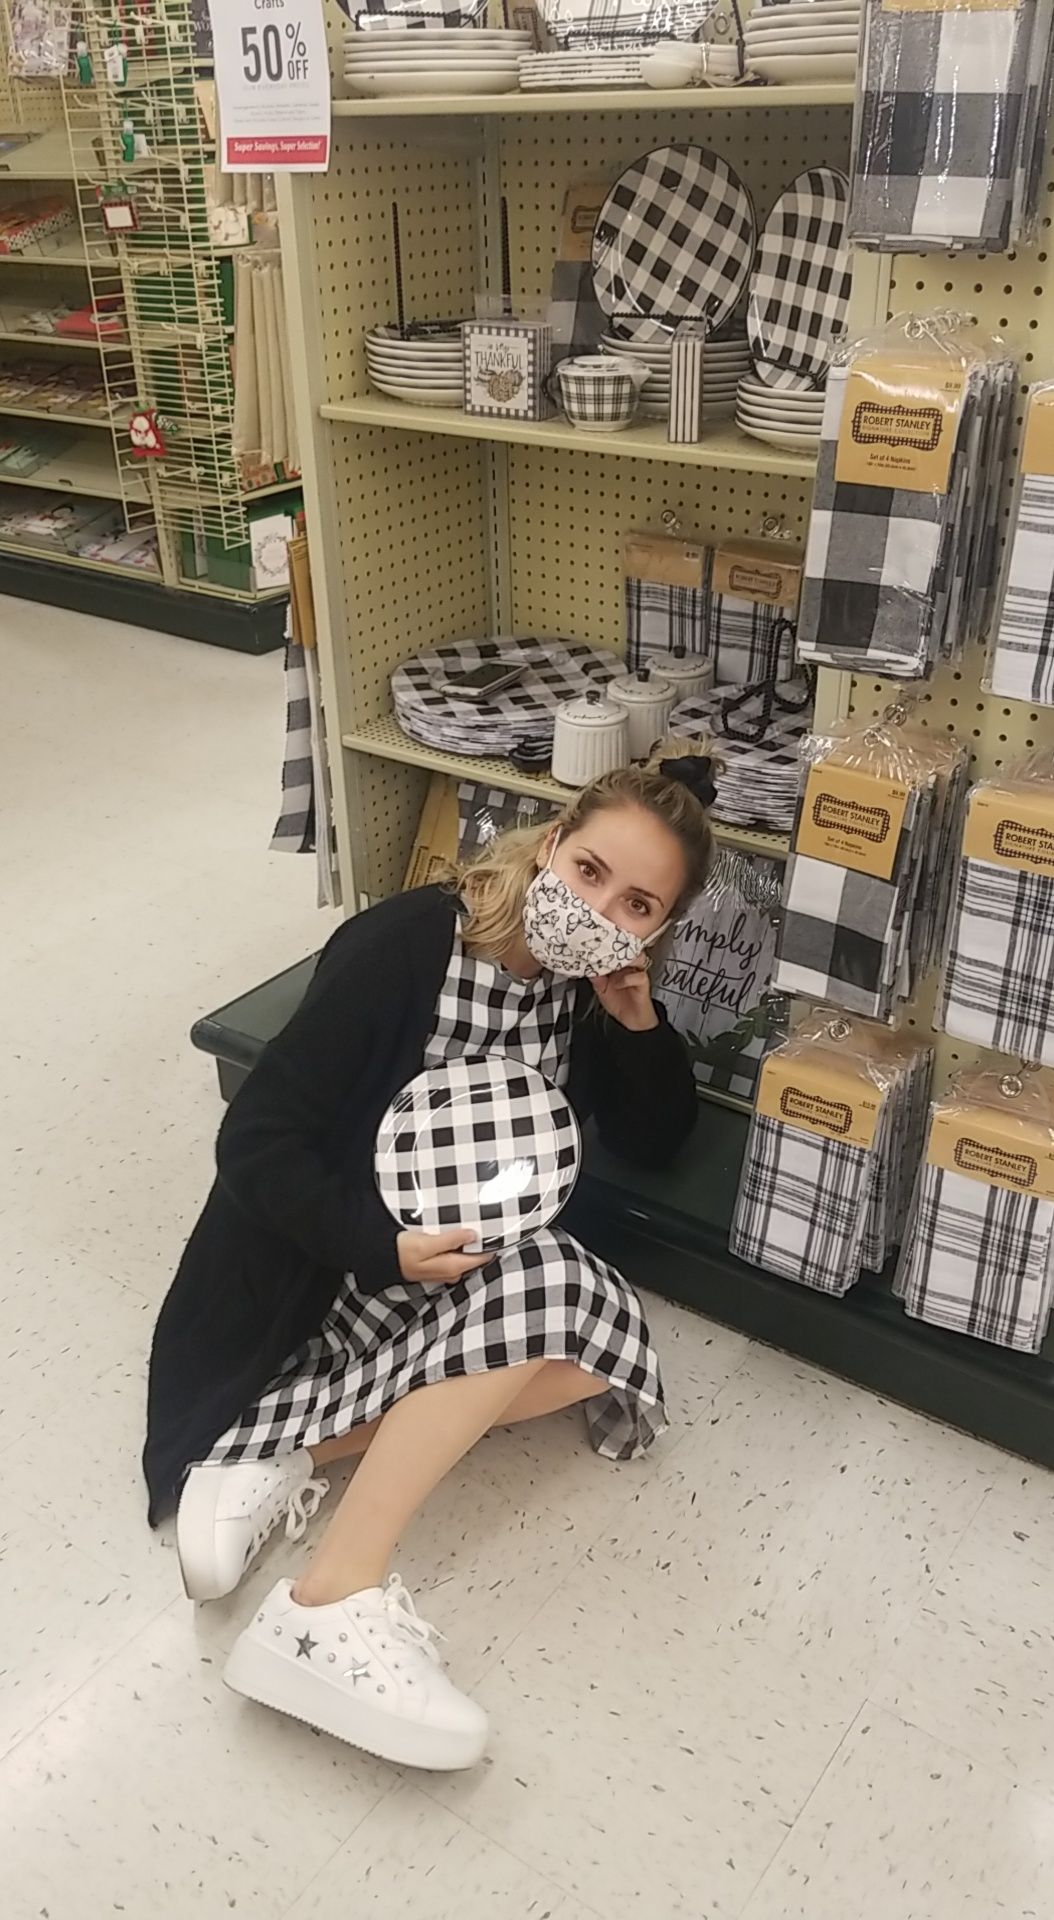 It was a very interesting trip to Hobby Lobby this evening